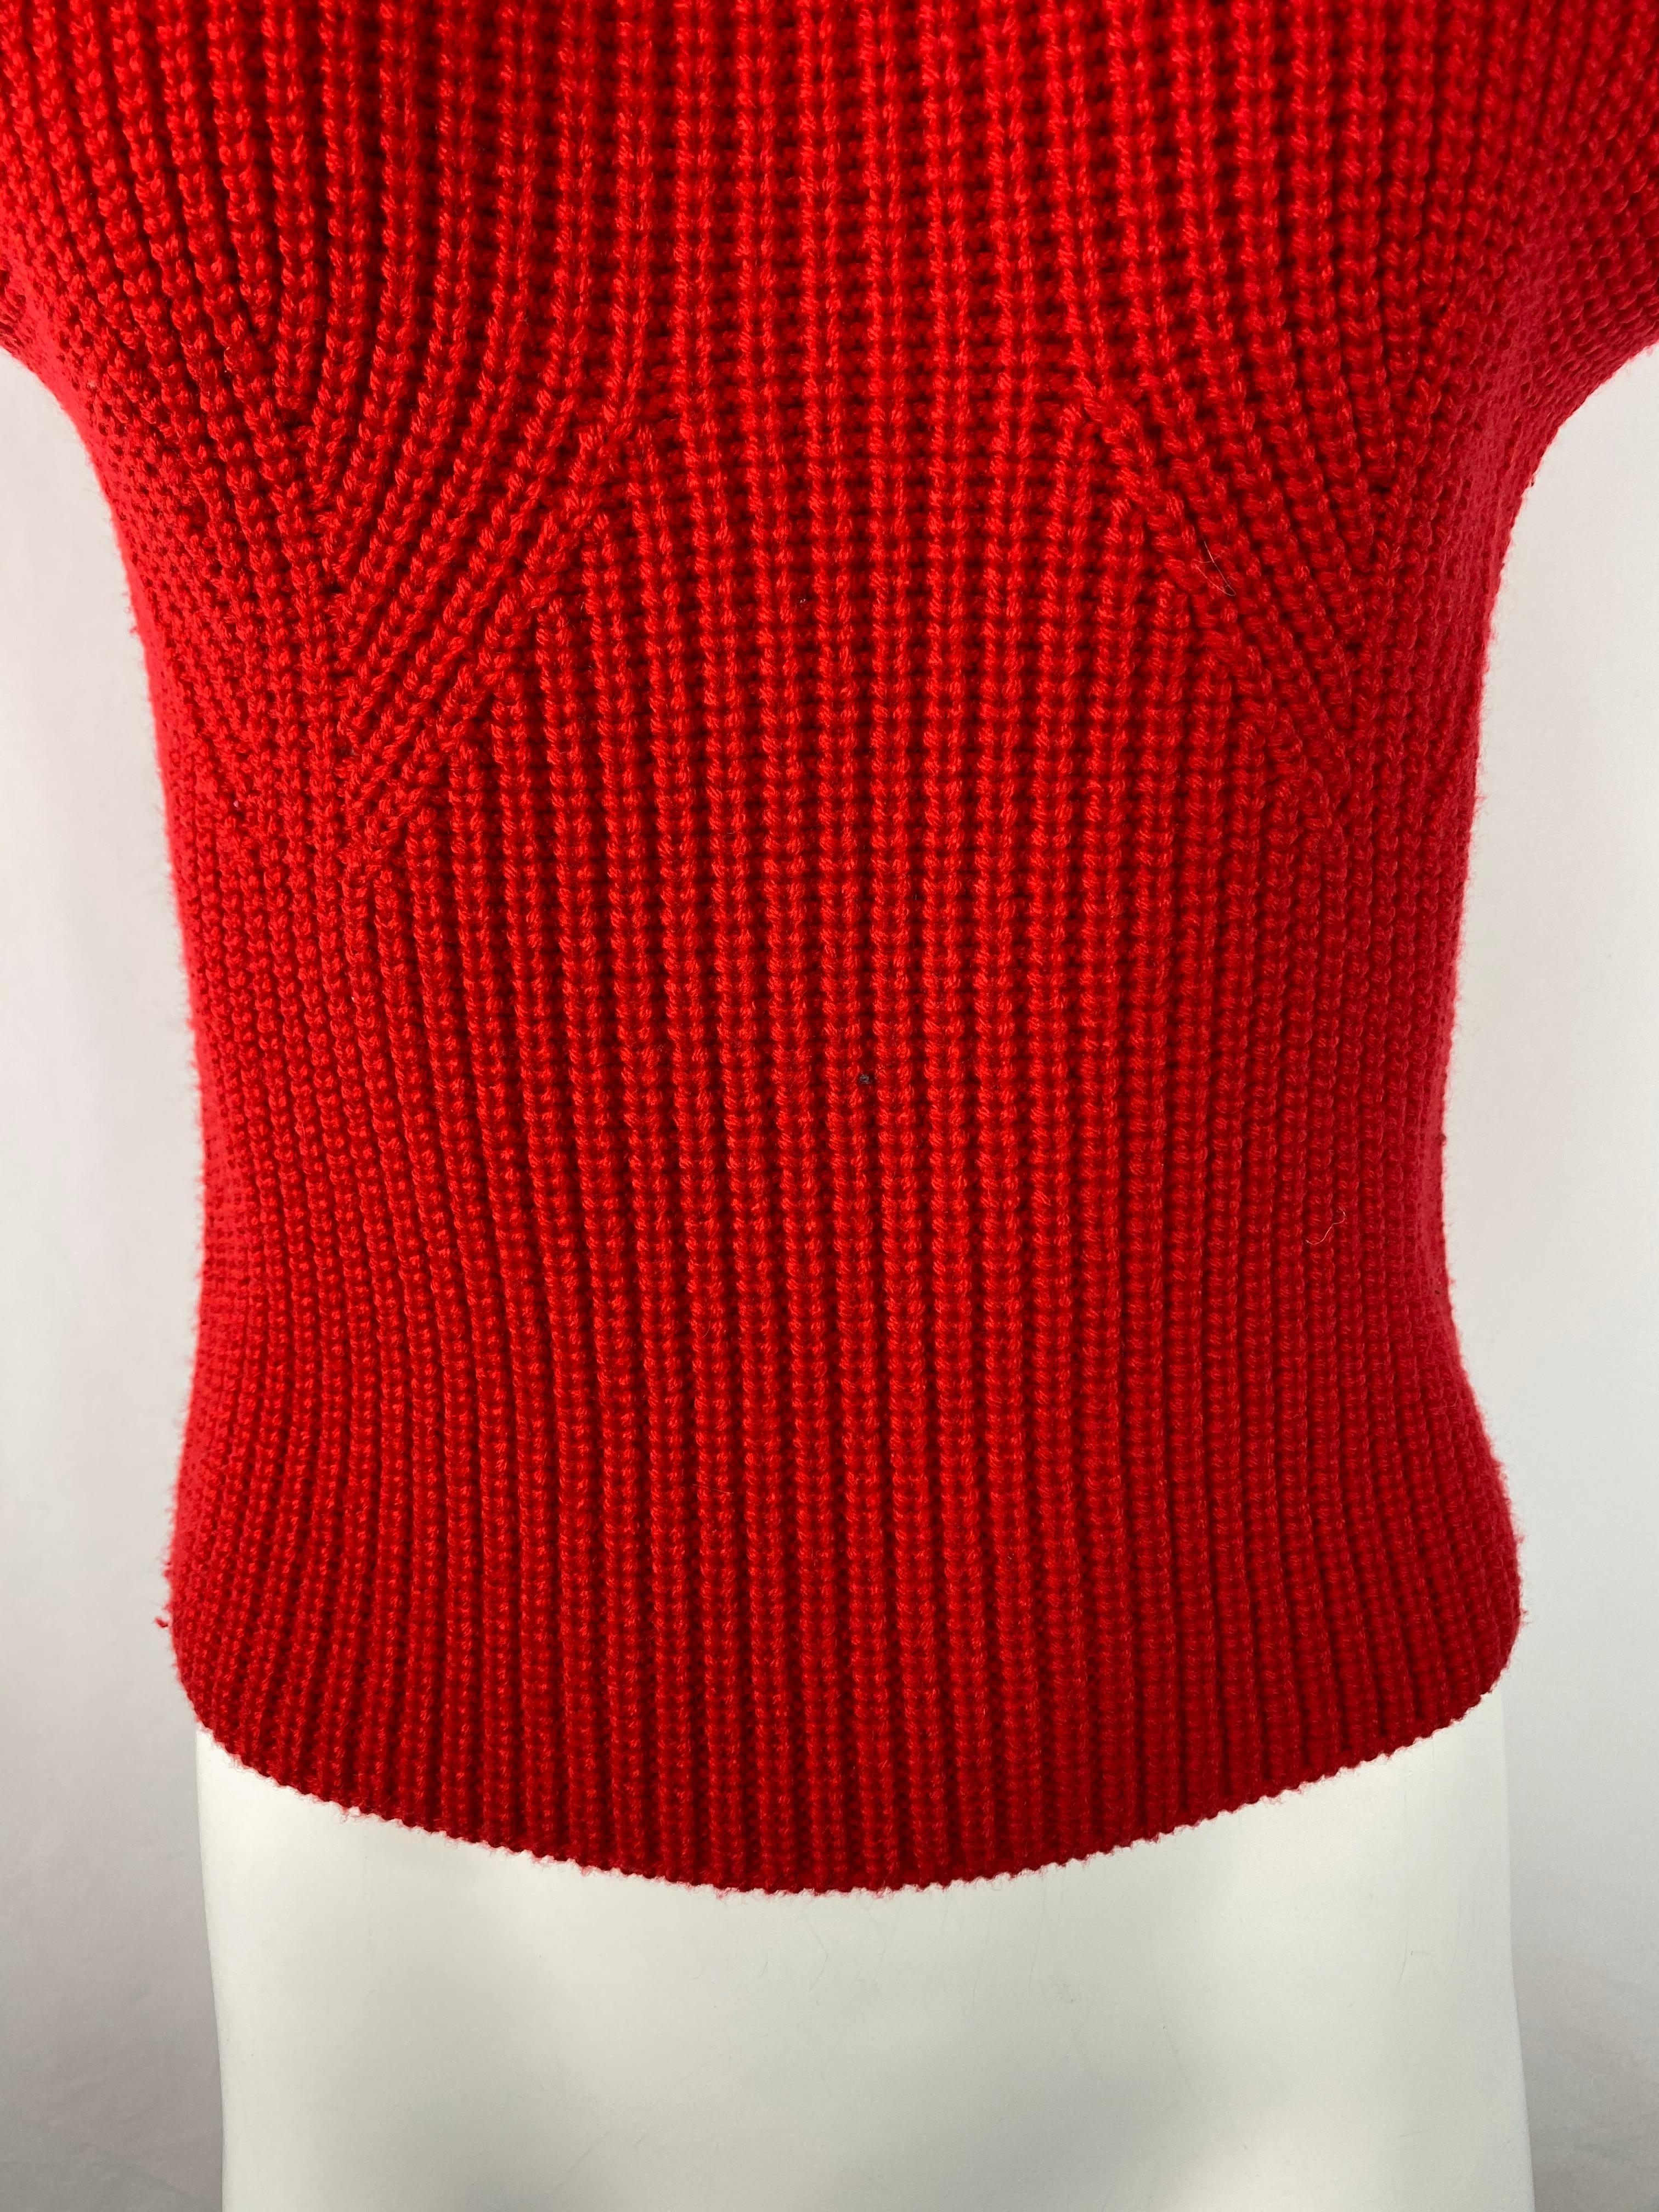 red sweater vest